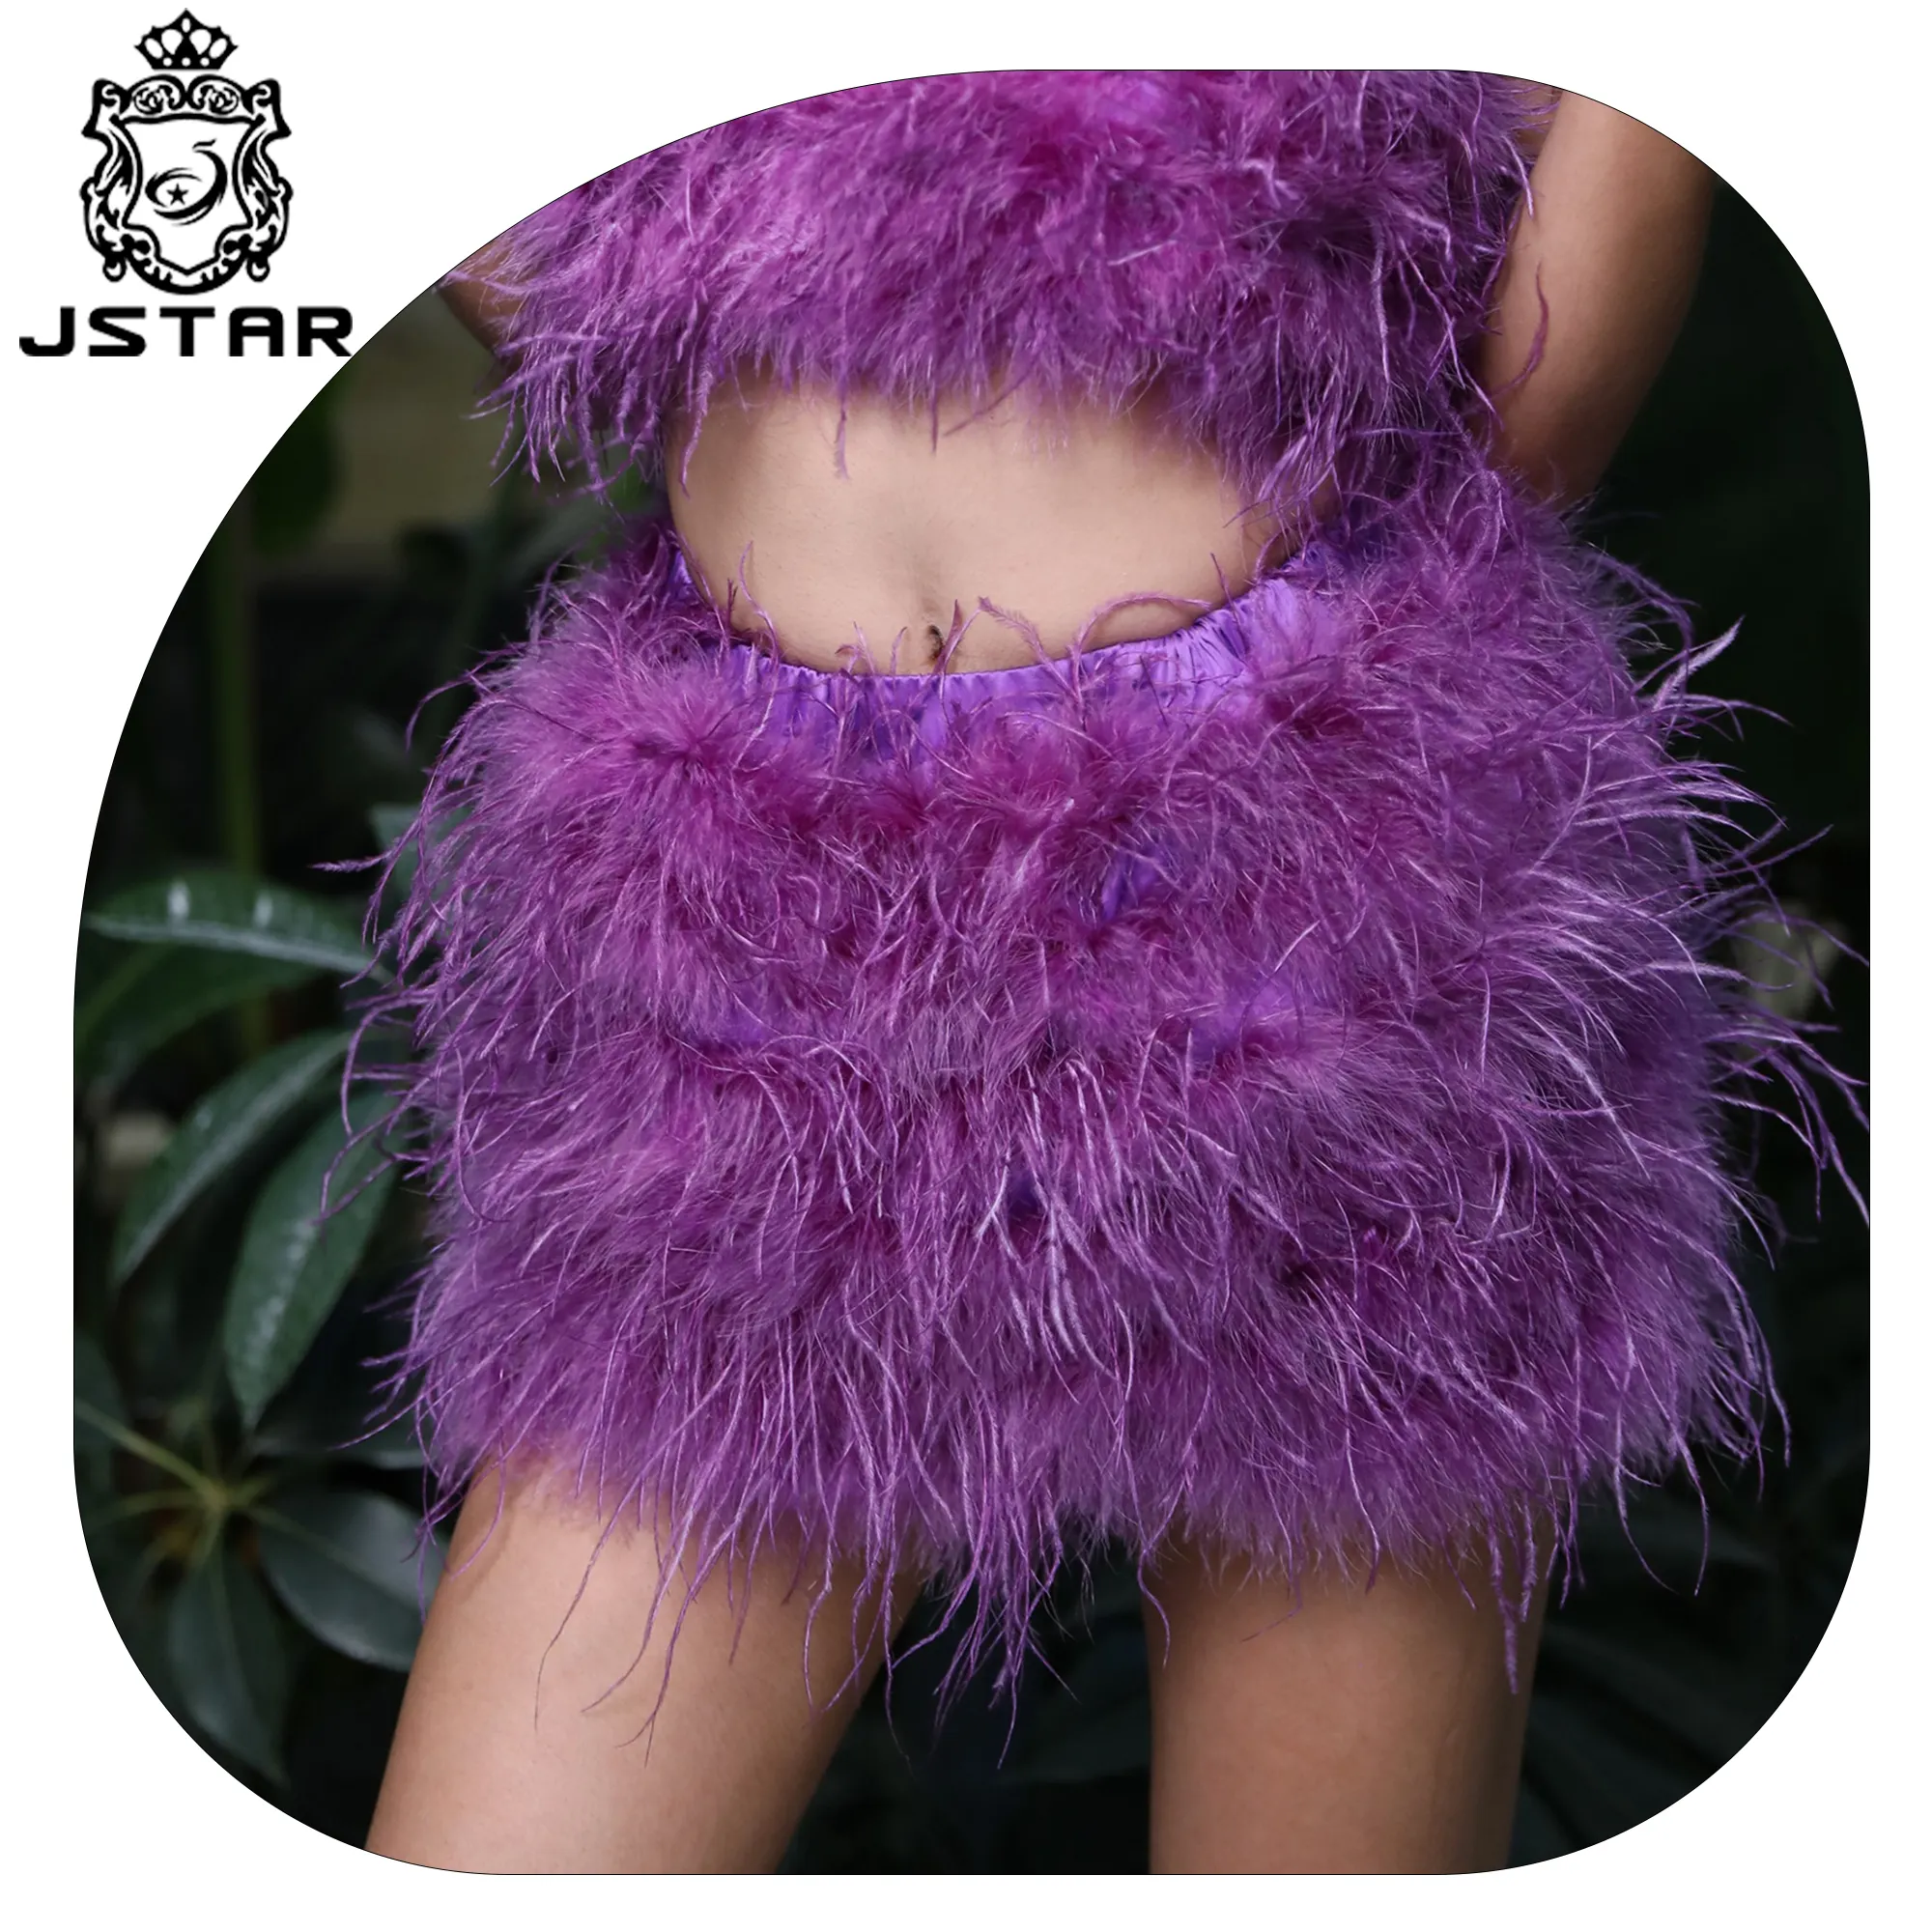 Jstar High Quality New Fashion Style skirts wrap Women Dresses ostrich feather mini skirt